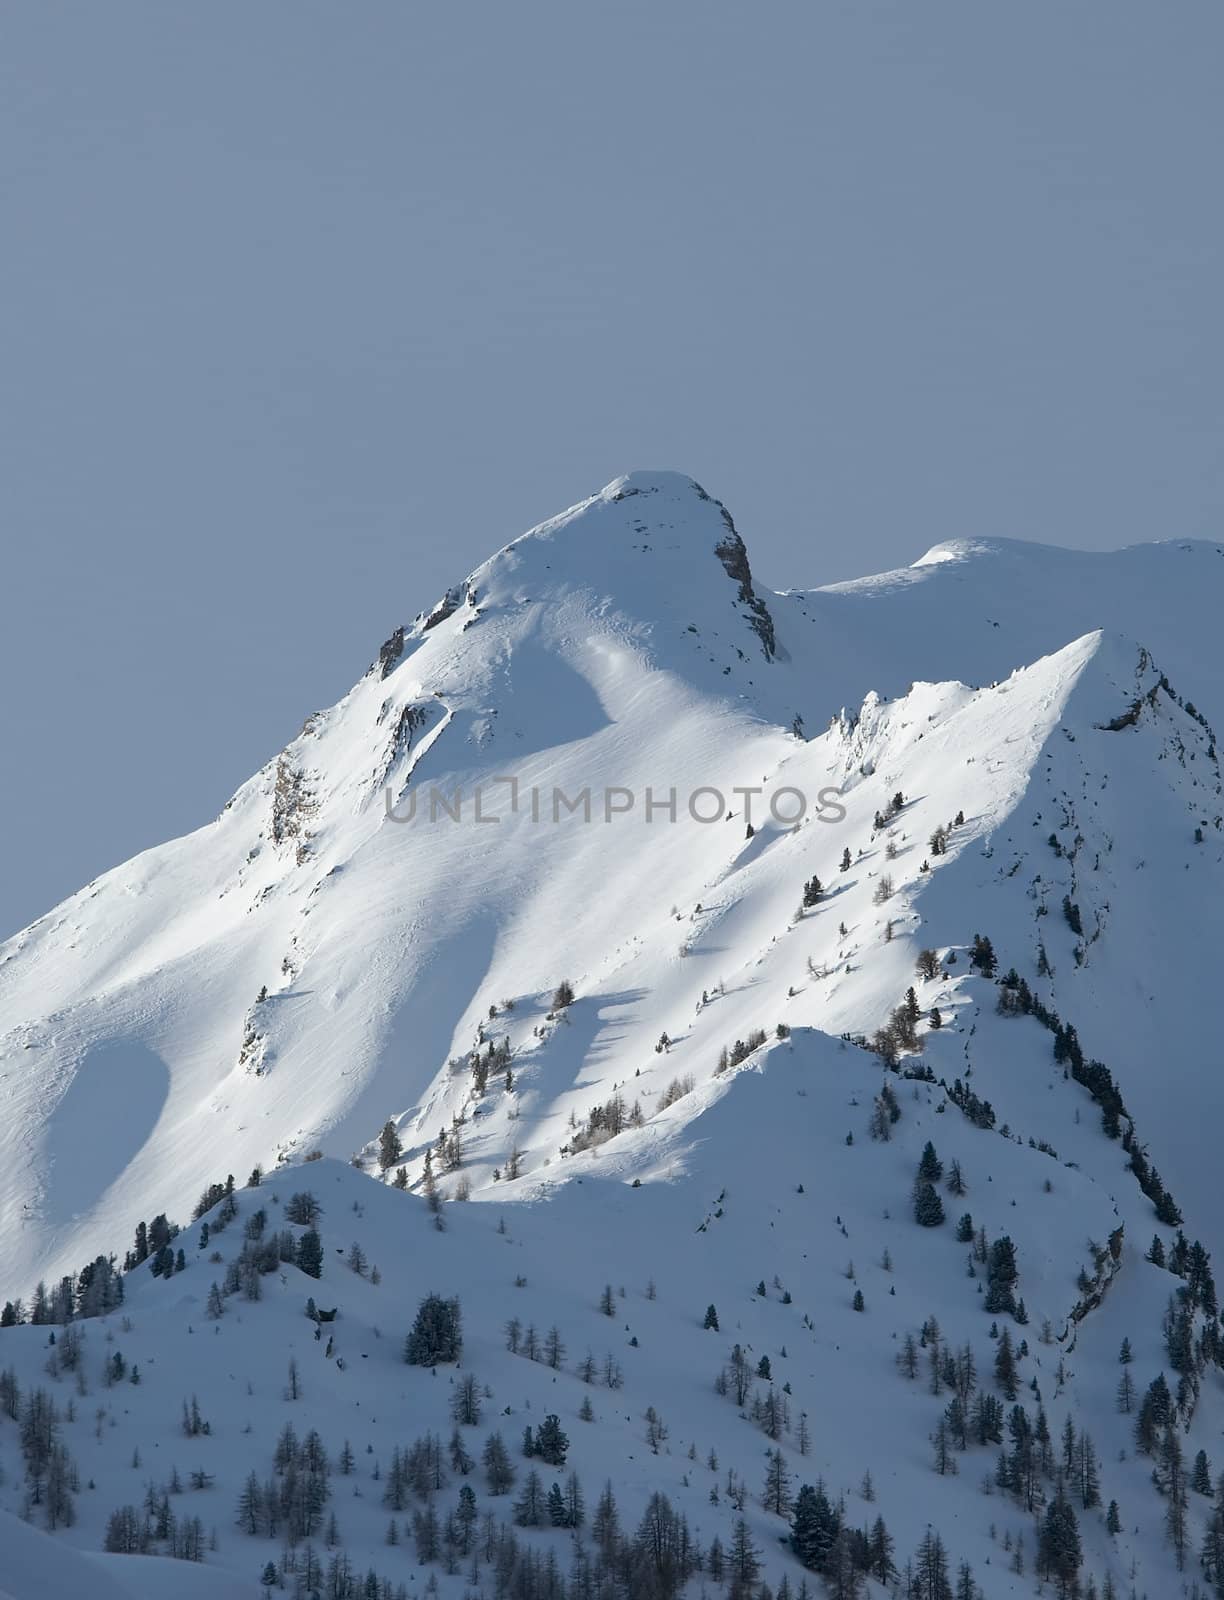 High mountains covered by snow